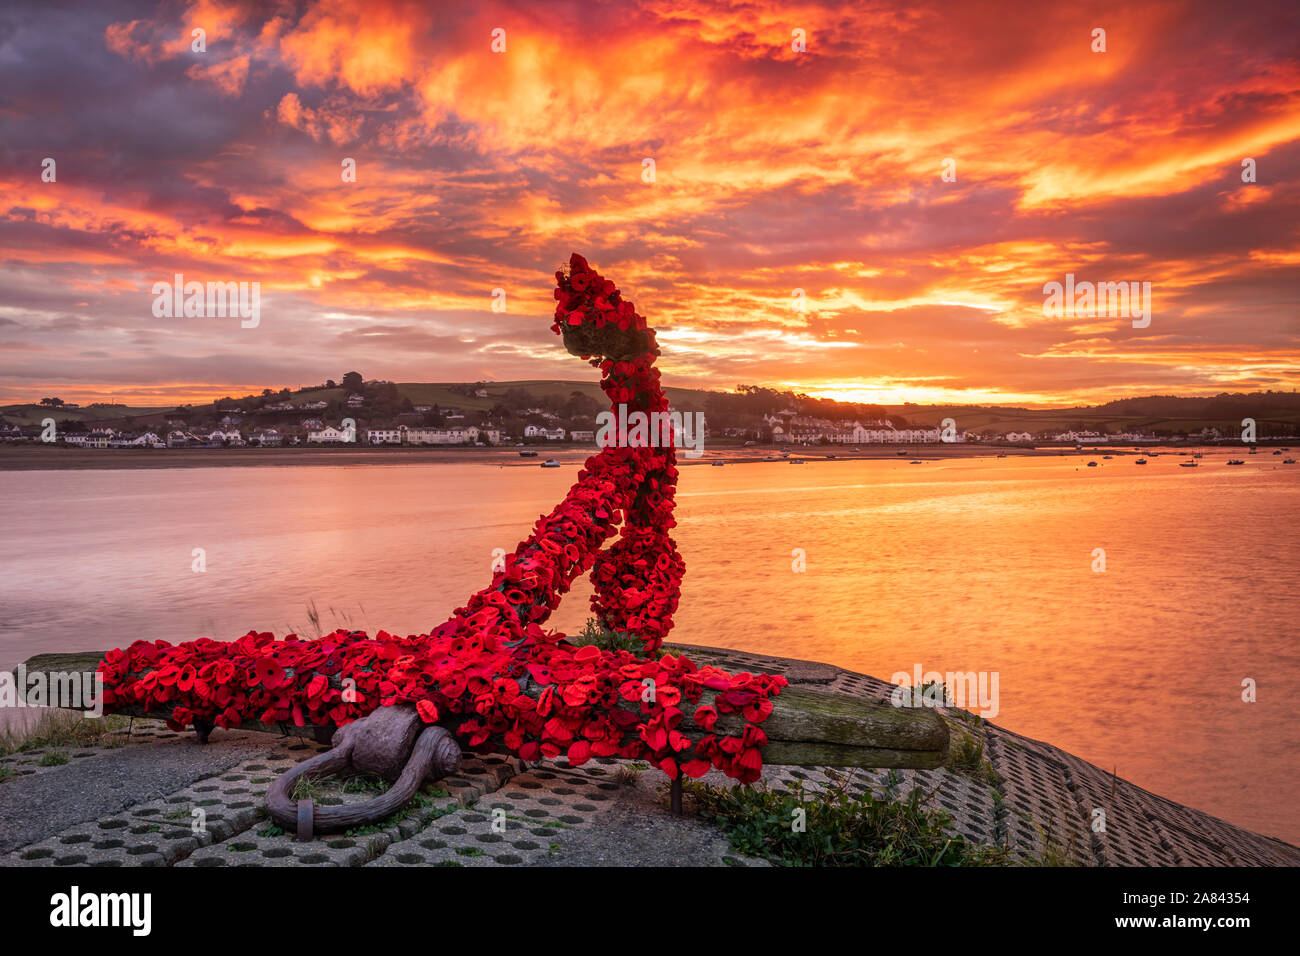 Appledore, North Devon, England. Wednesday 6th November 2019. UK Weather. After a cold night there was a  colourful sunrise over the River Torridge estuary at Appledore in North Devon. The landmark anchor at Appledore has been covered by the local community with knitted poppies in preparation for the forthcoming Remembrance Sunday. Terry Mathews/Alamy Live News. Stock Photo